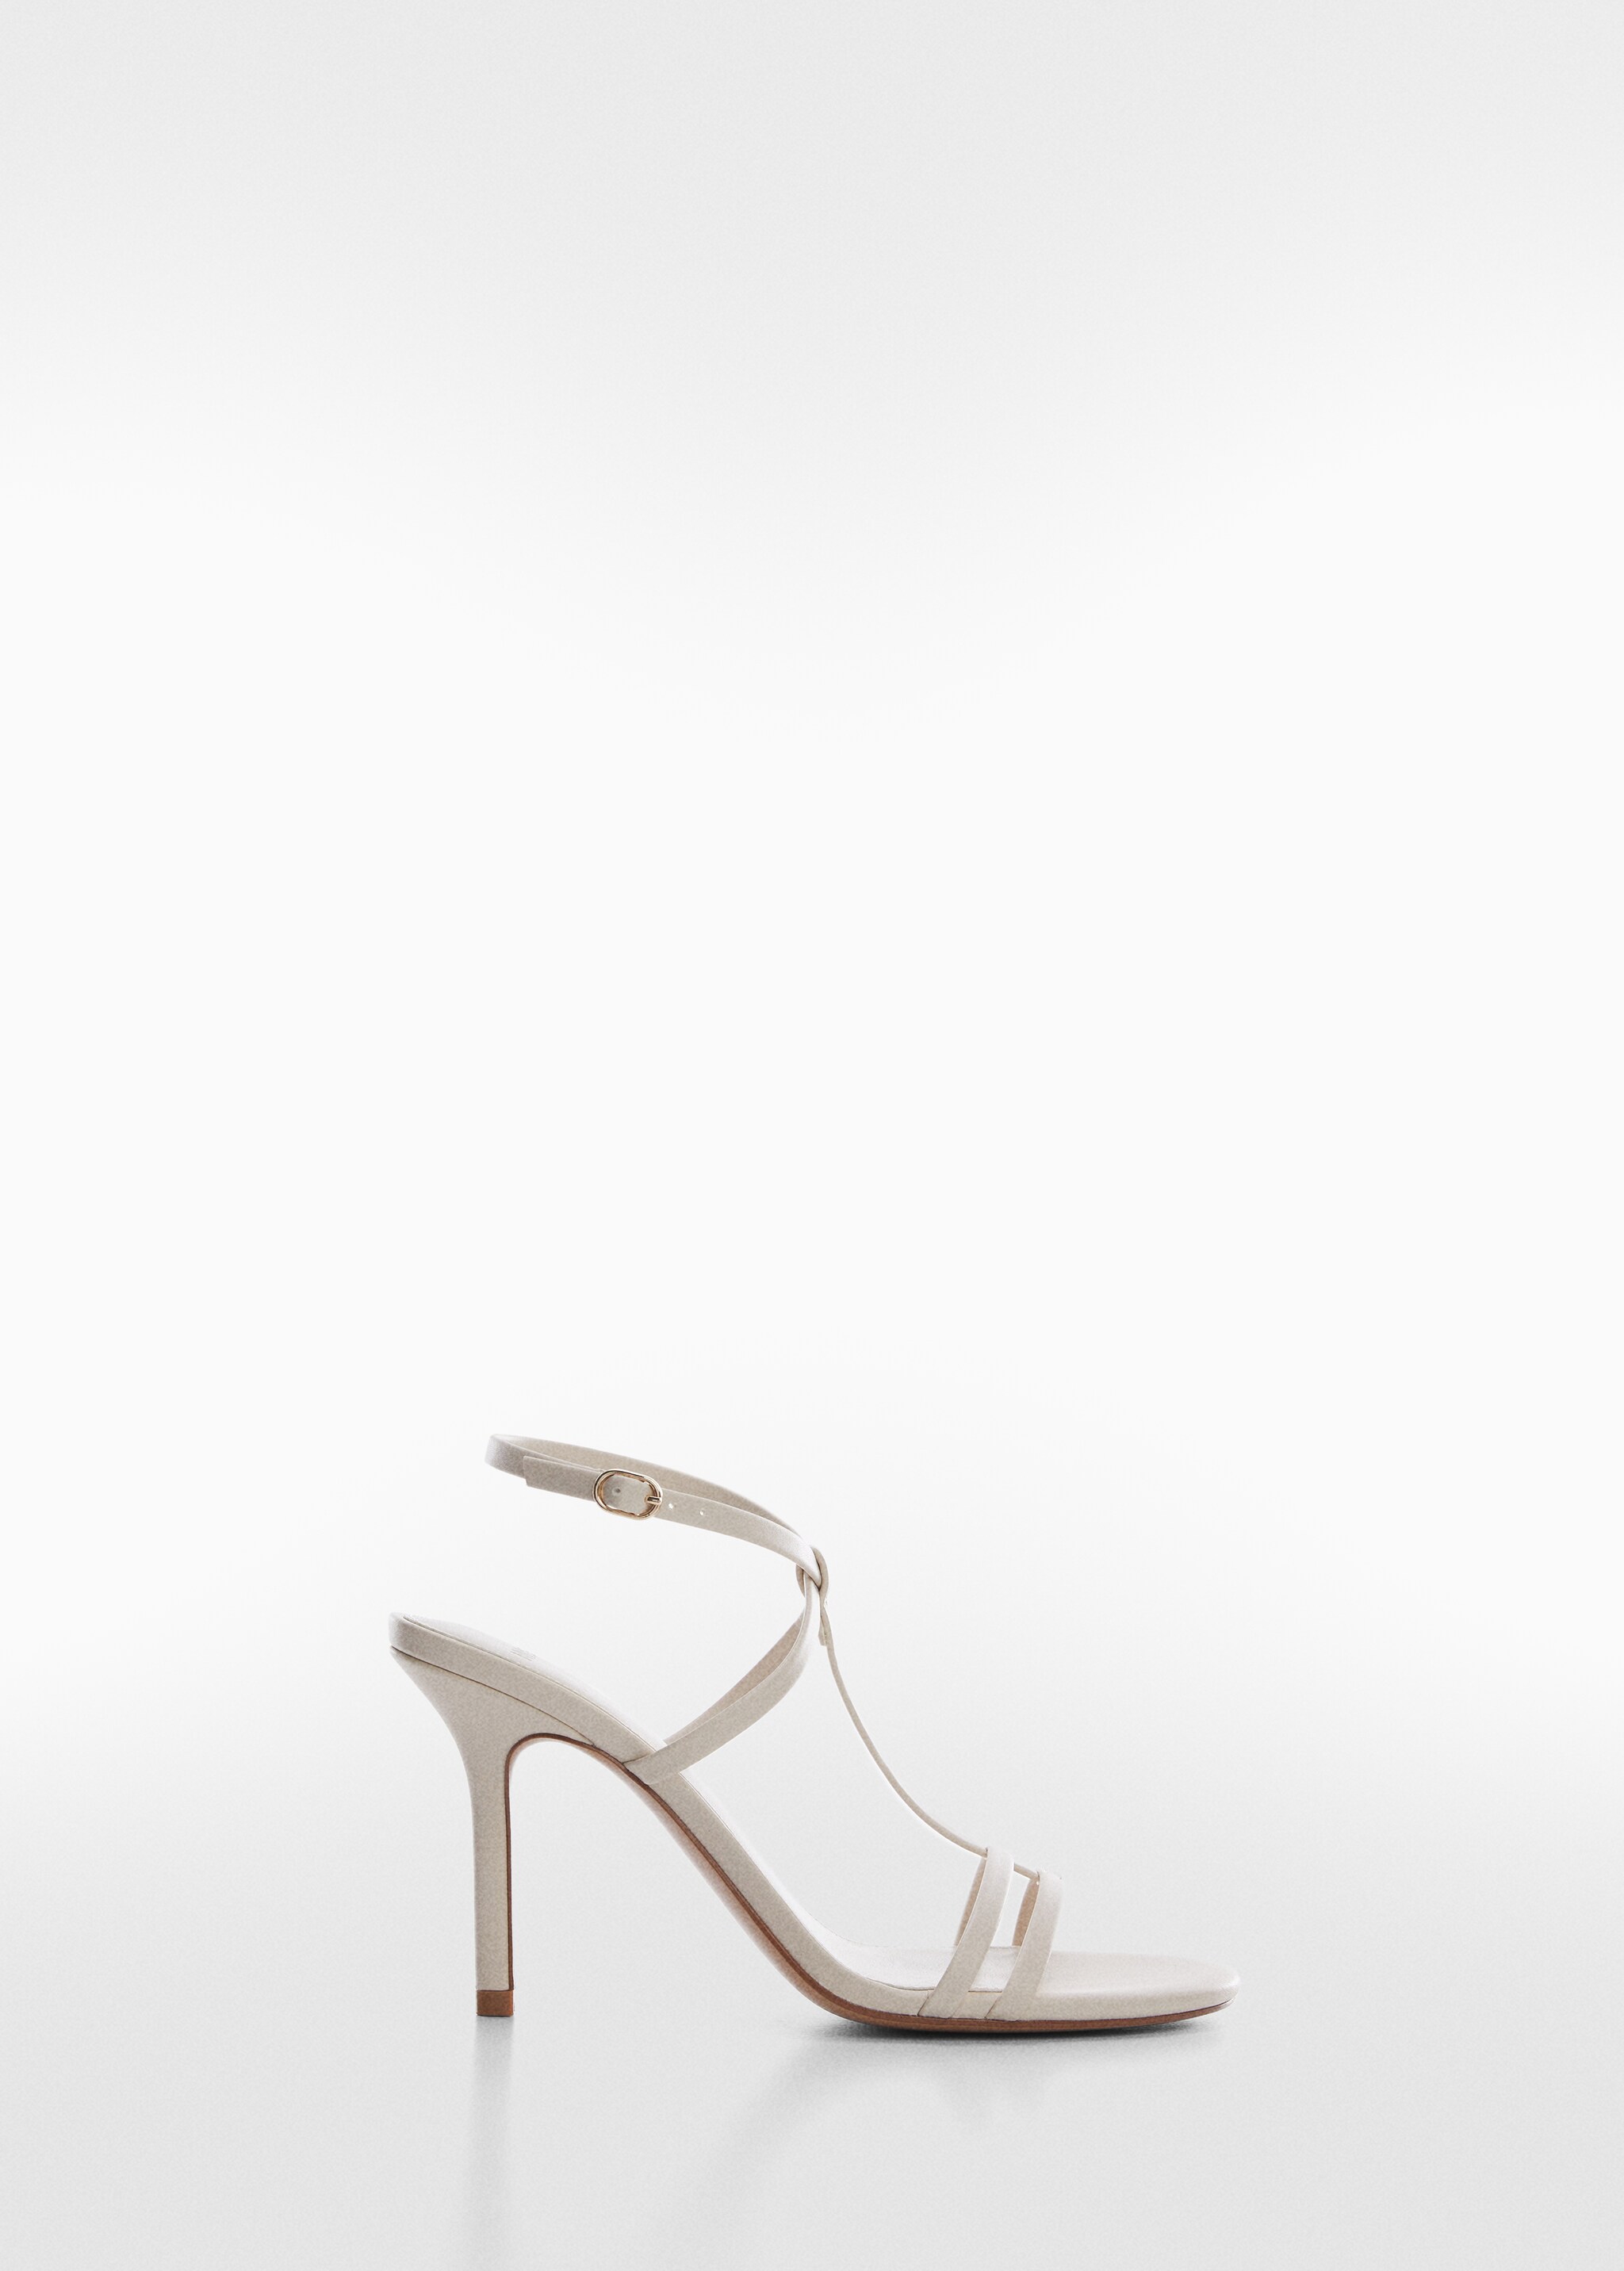 Ankle-cuff heeled sandals - Article without model